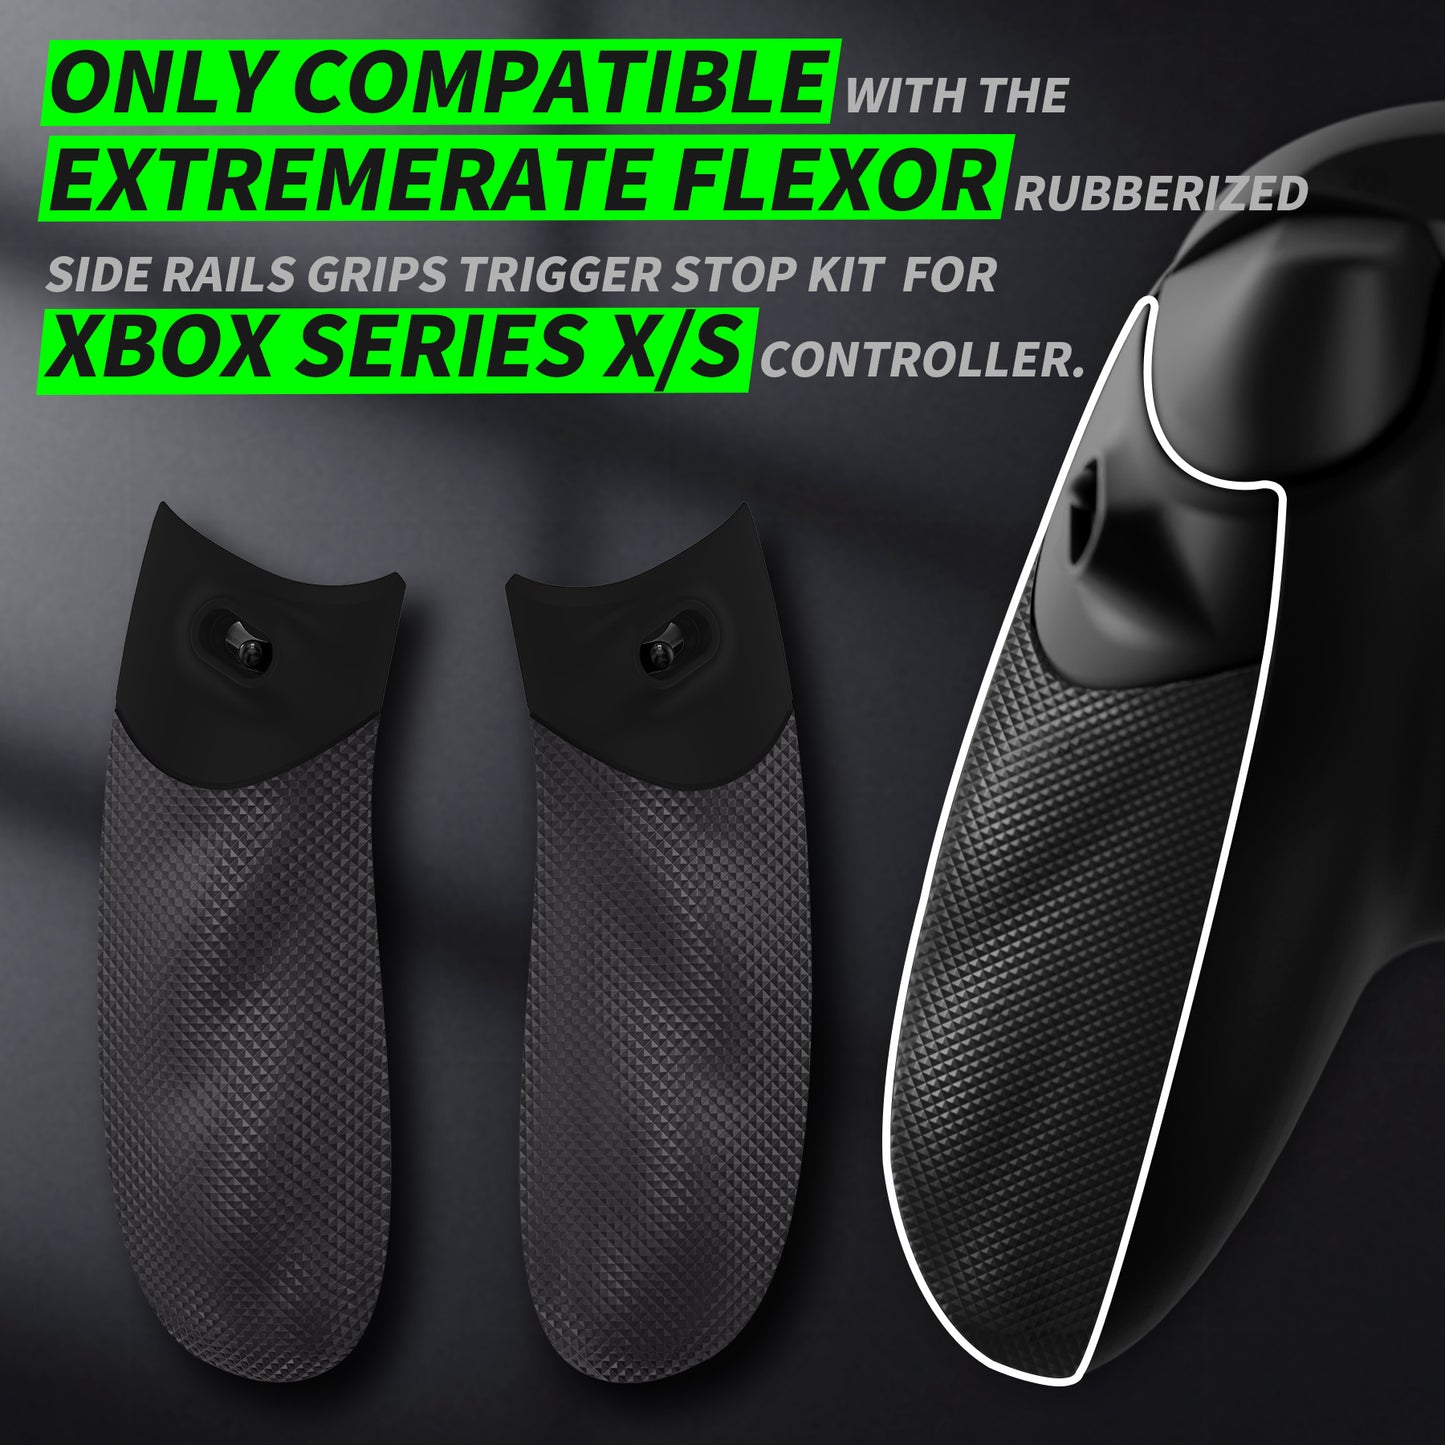 eXtremeRate Retail Turn Flexor Handle Grips Trigger Stop Kit to Clicky Version - DIY Replacement Clicky Kit for Xbox Series X & S Controller eXtremeRate Flexor Trigger Stopper Side Rail Grips - Without Shells - X3MD004